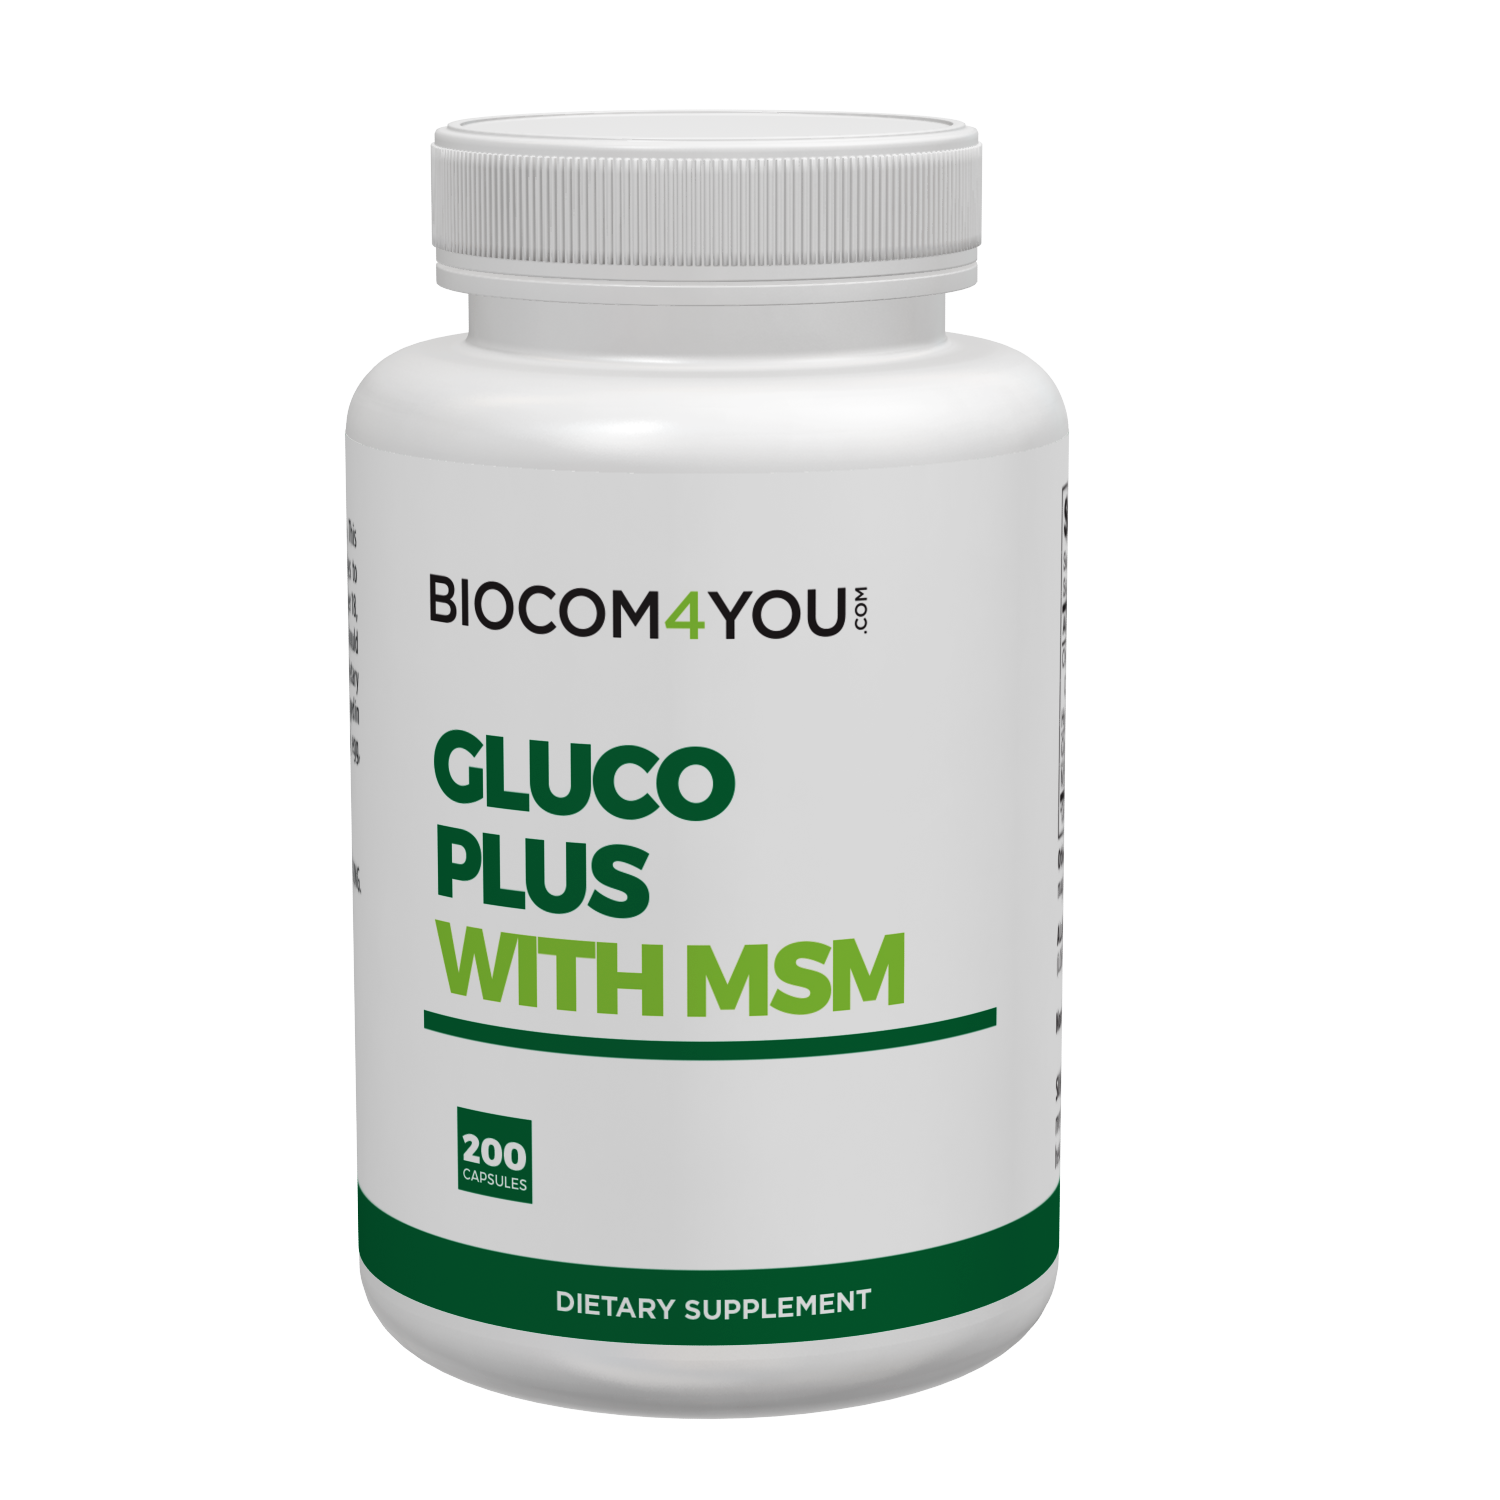 Gluco Plus with MSM